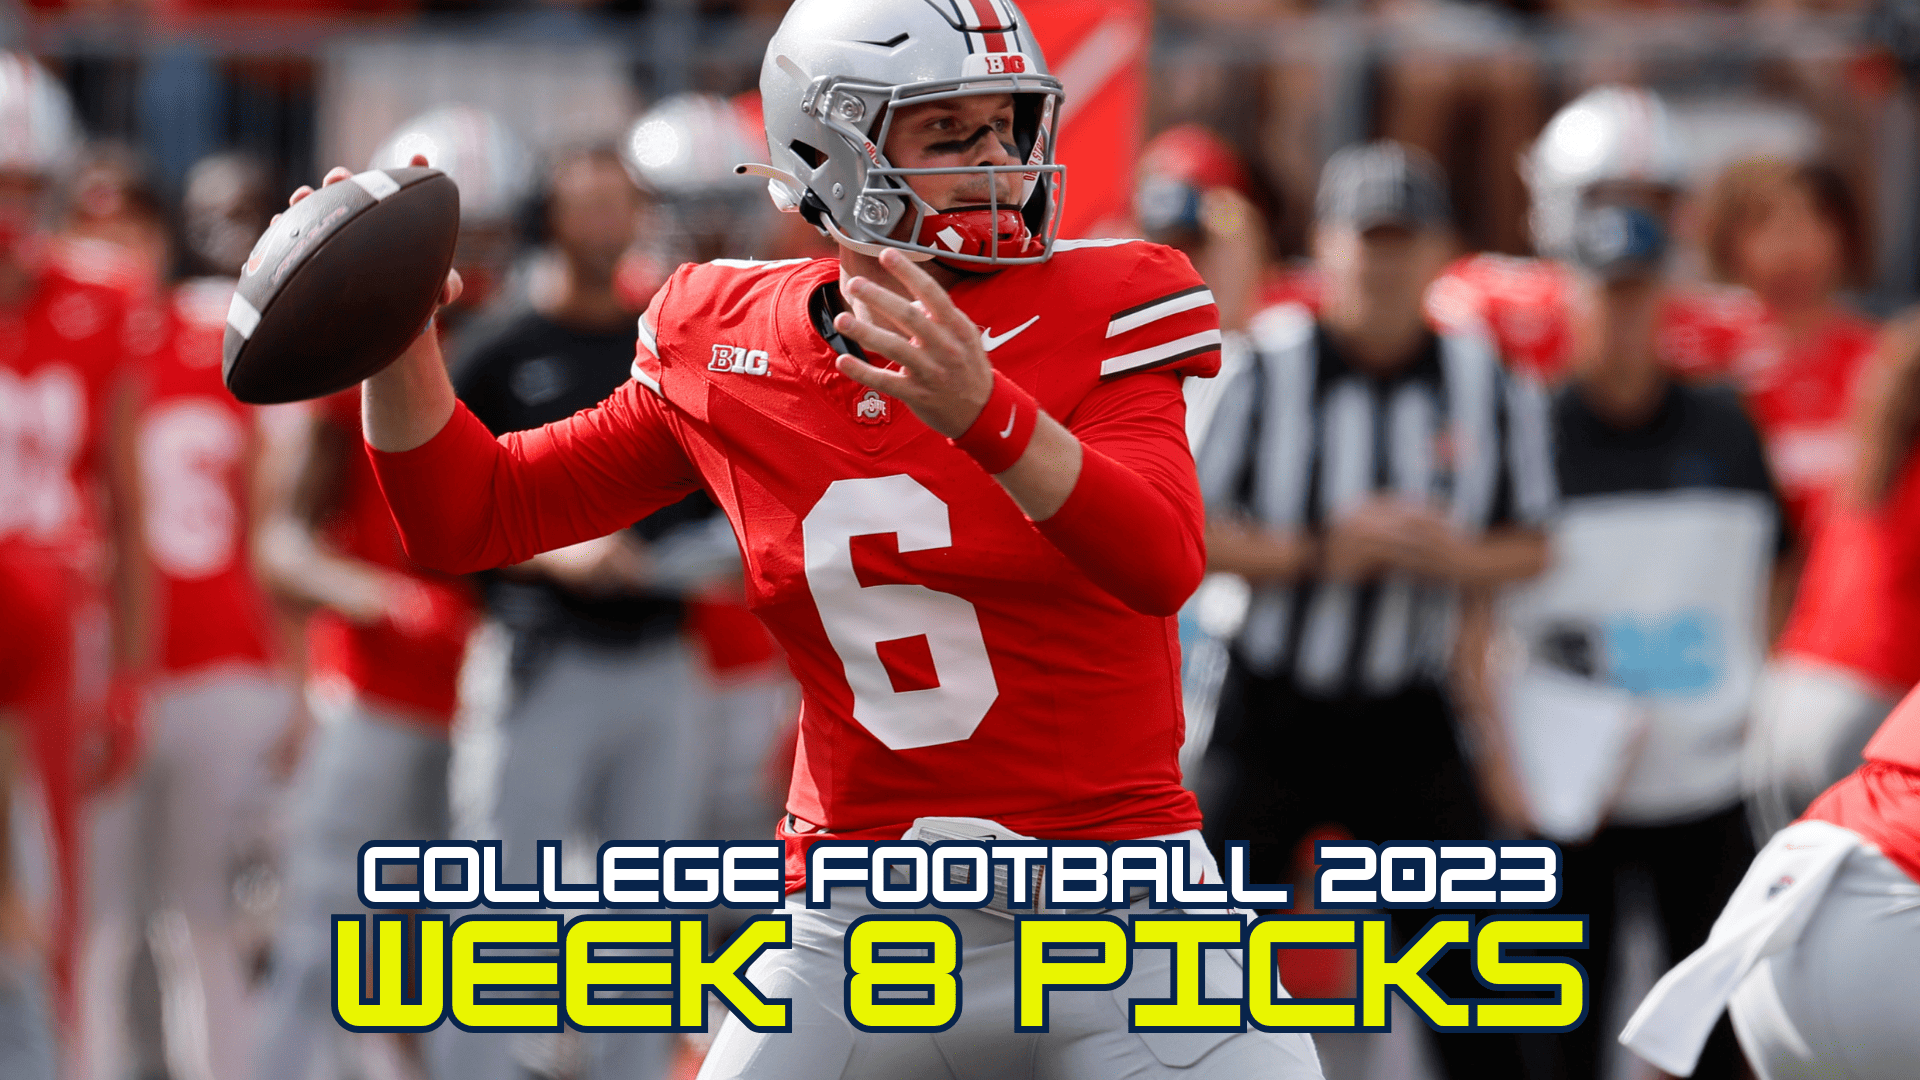 College Football Predictions for Week 7